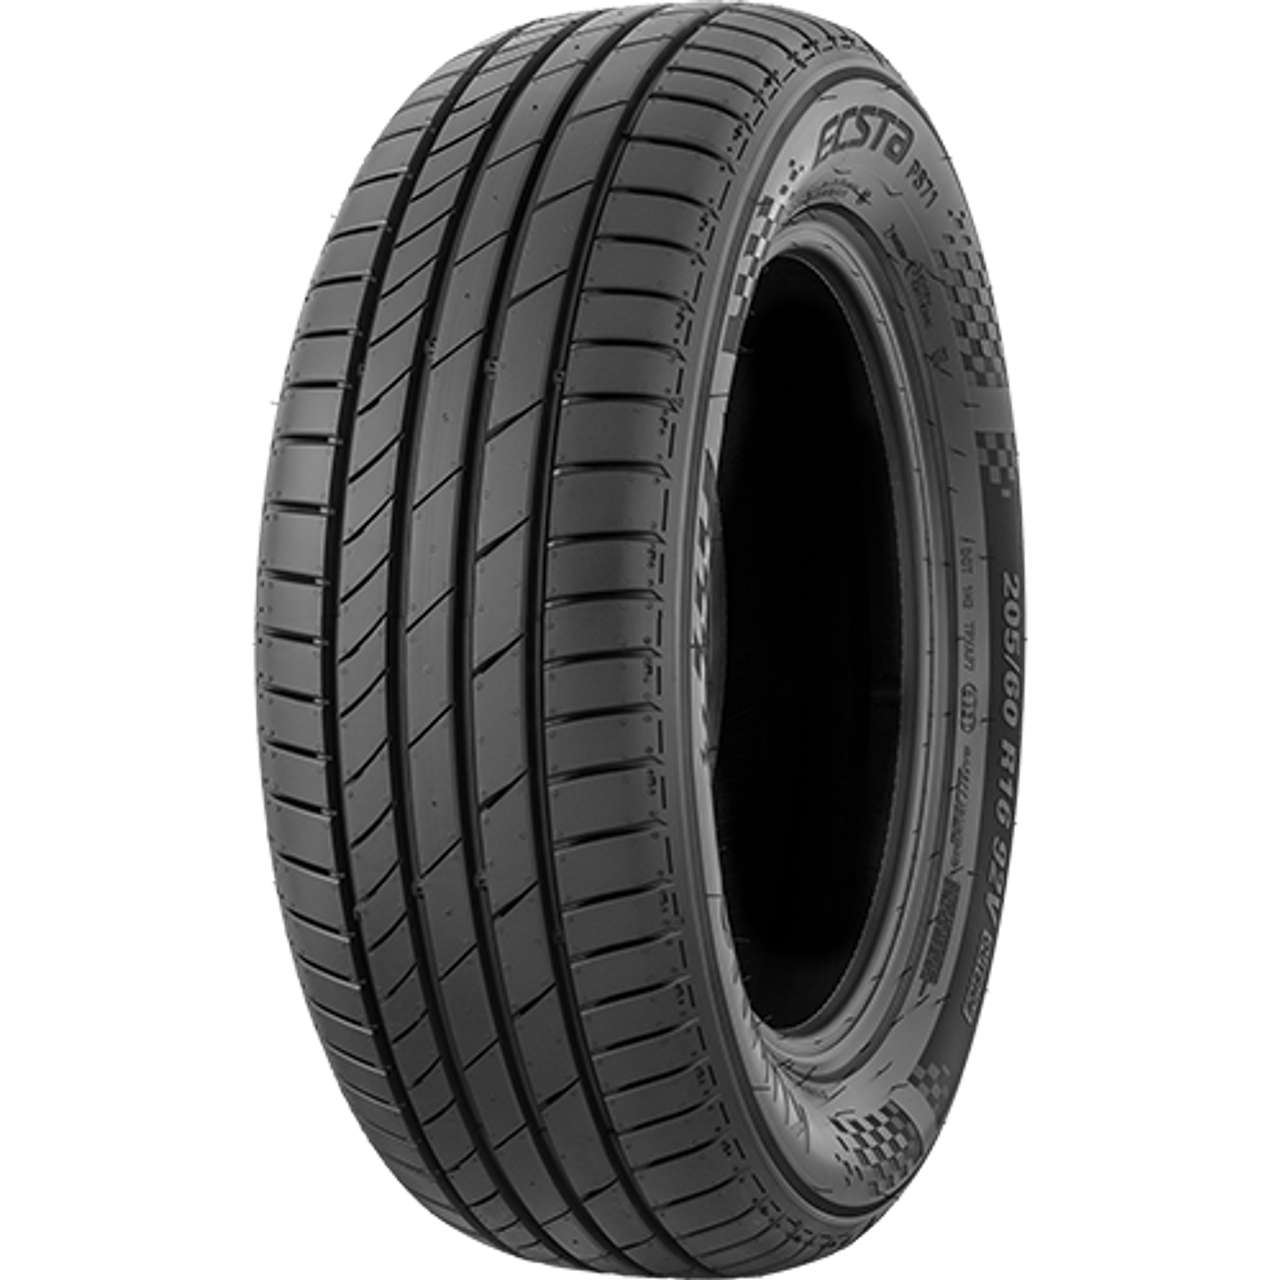 KUMHO ECSTA PS71 275/35ZR20 102Y BSW